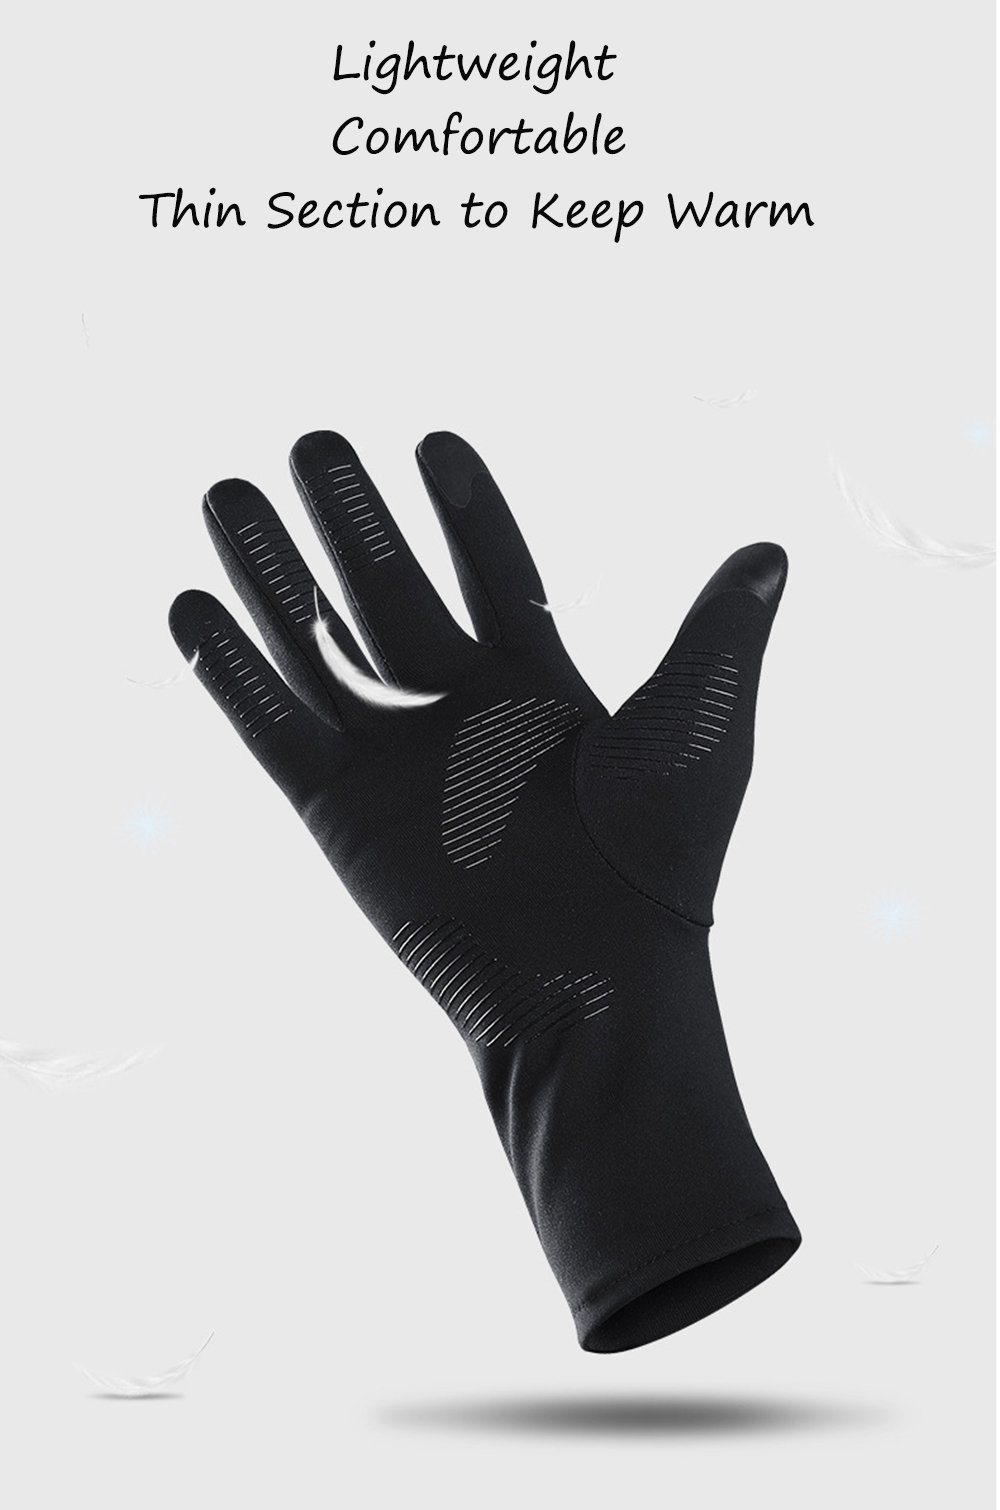 Bakeey-Light-All-Finger-Touch-Screen-Gloves-Windproof-Anti-skid-Winter-Thickness-Warm-Outdoor-Motorc-1618100-5